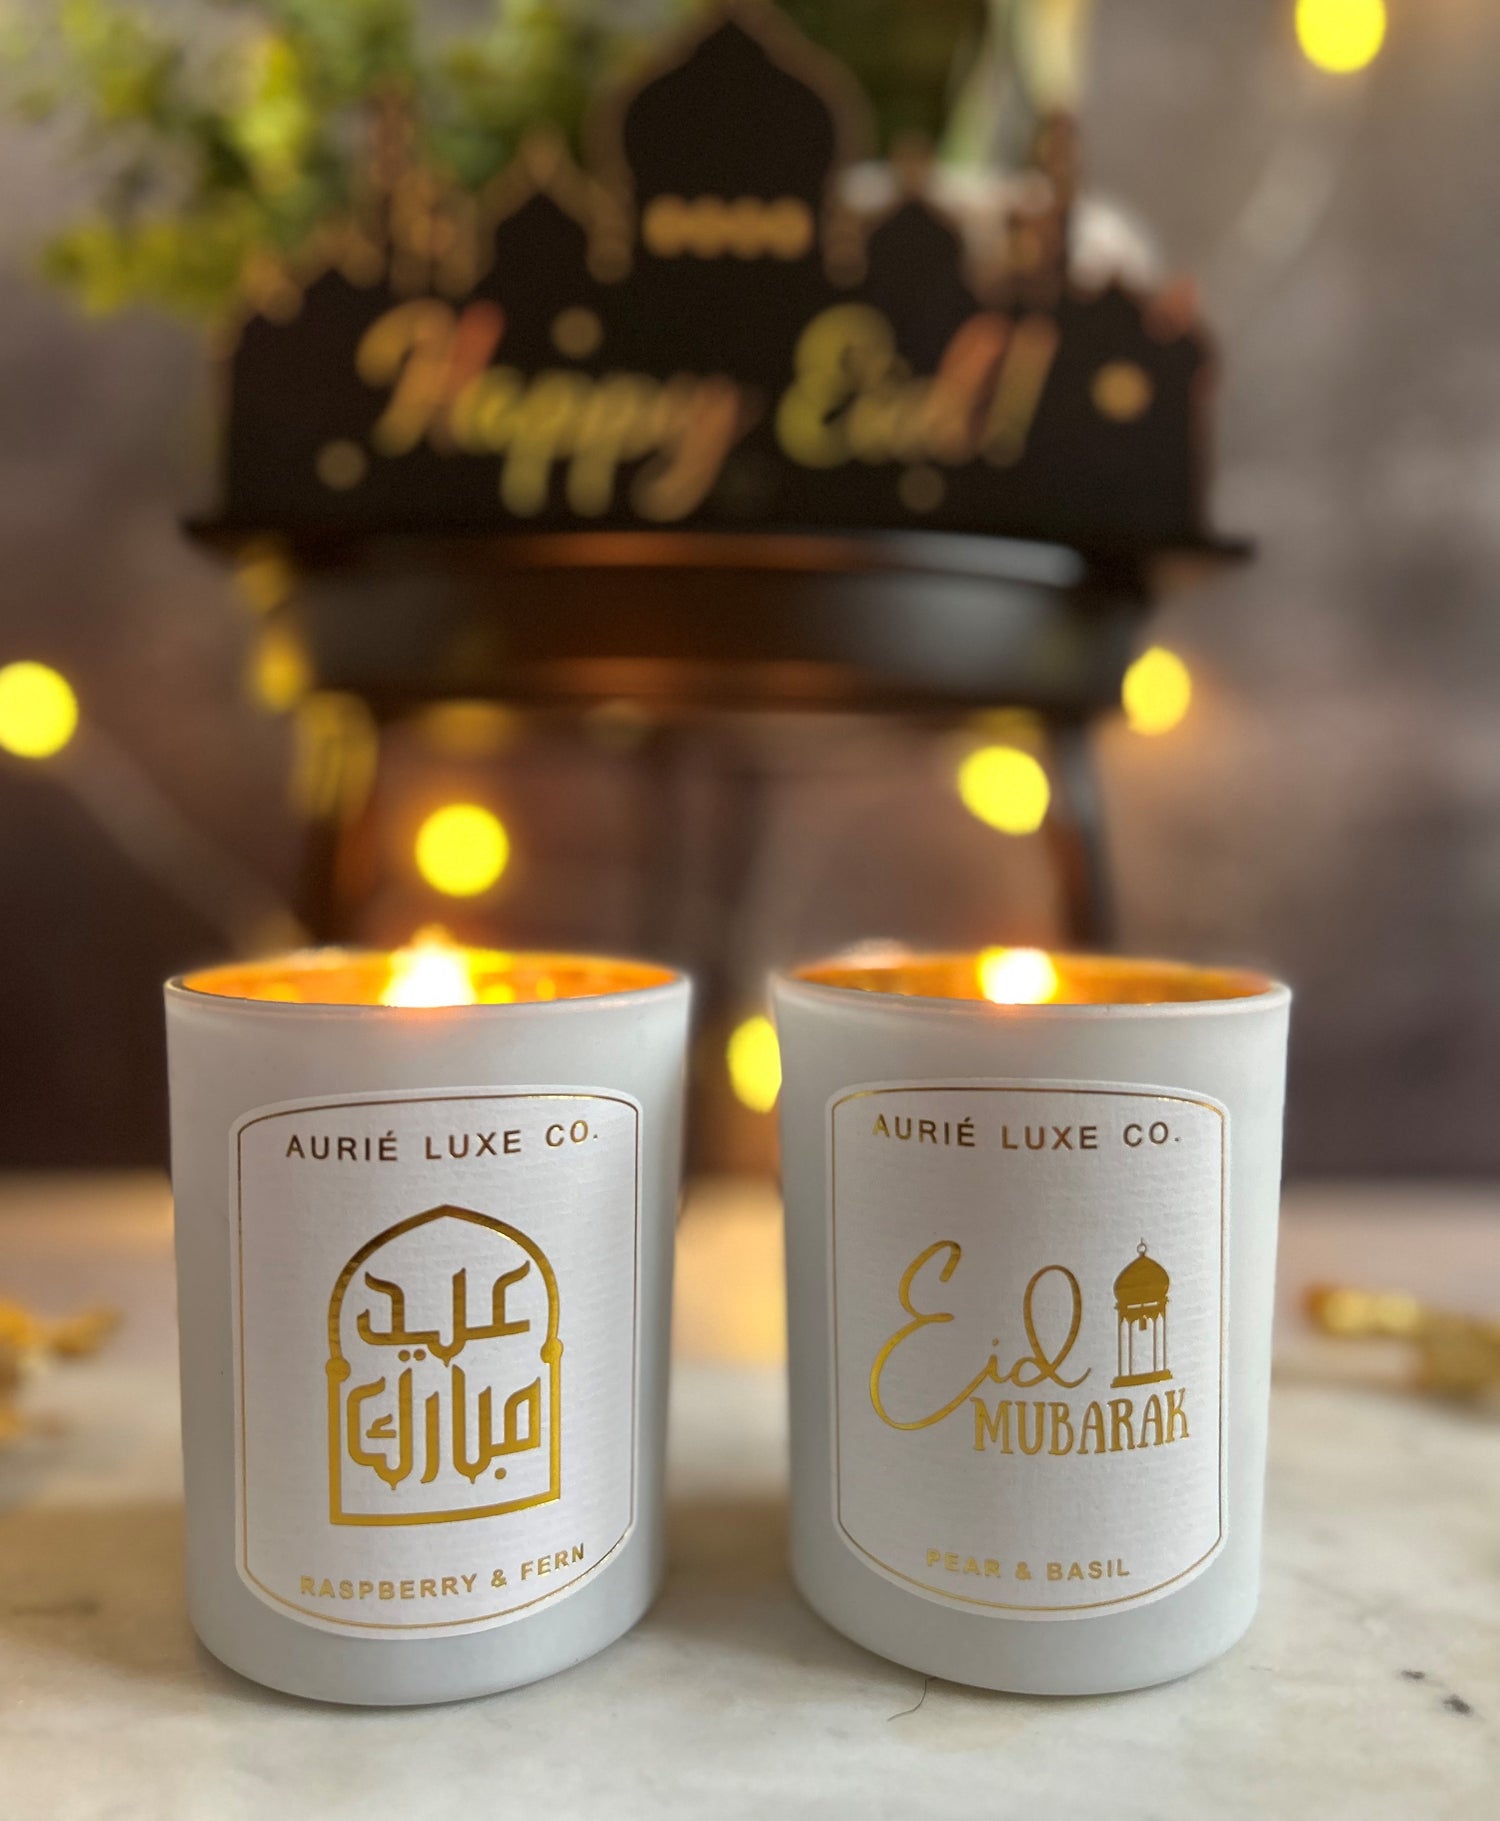 Buy Luxury Scented Candles in Canada – Aurié Luxe Co.